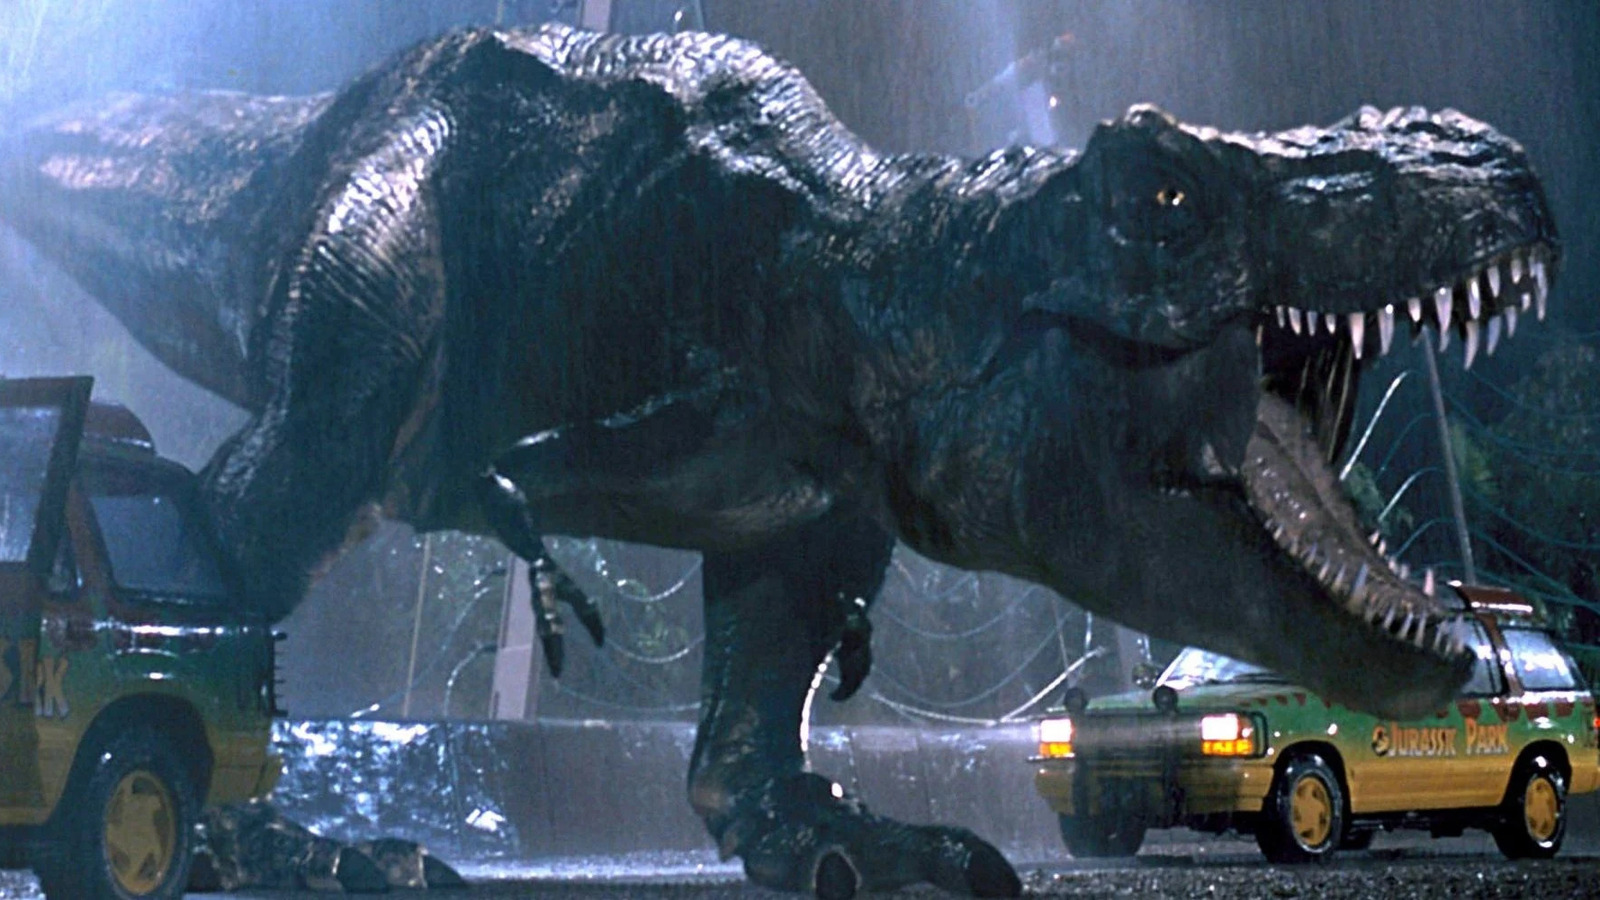 Jurassic Park's T-Rex May Fall Victim to an Unsettling New